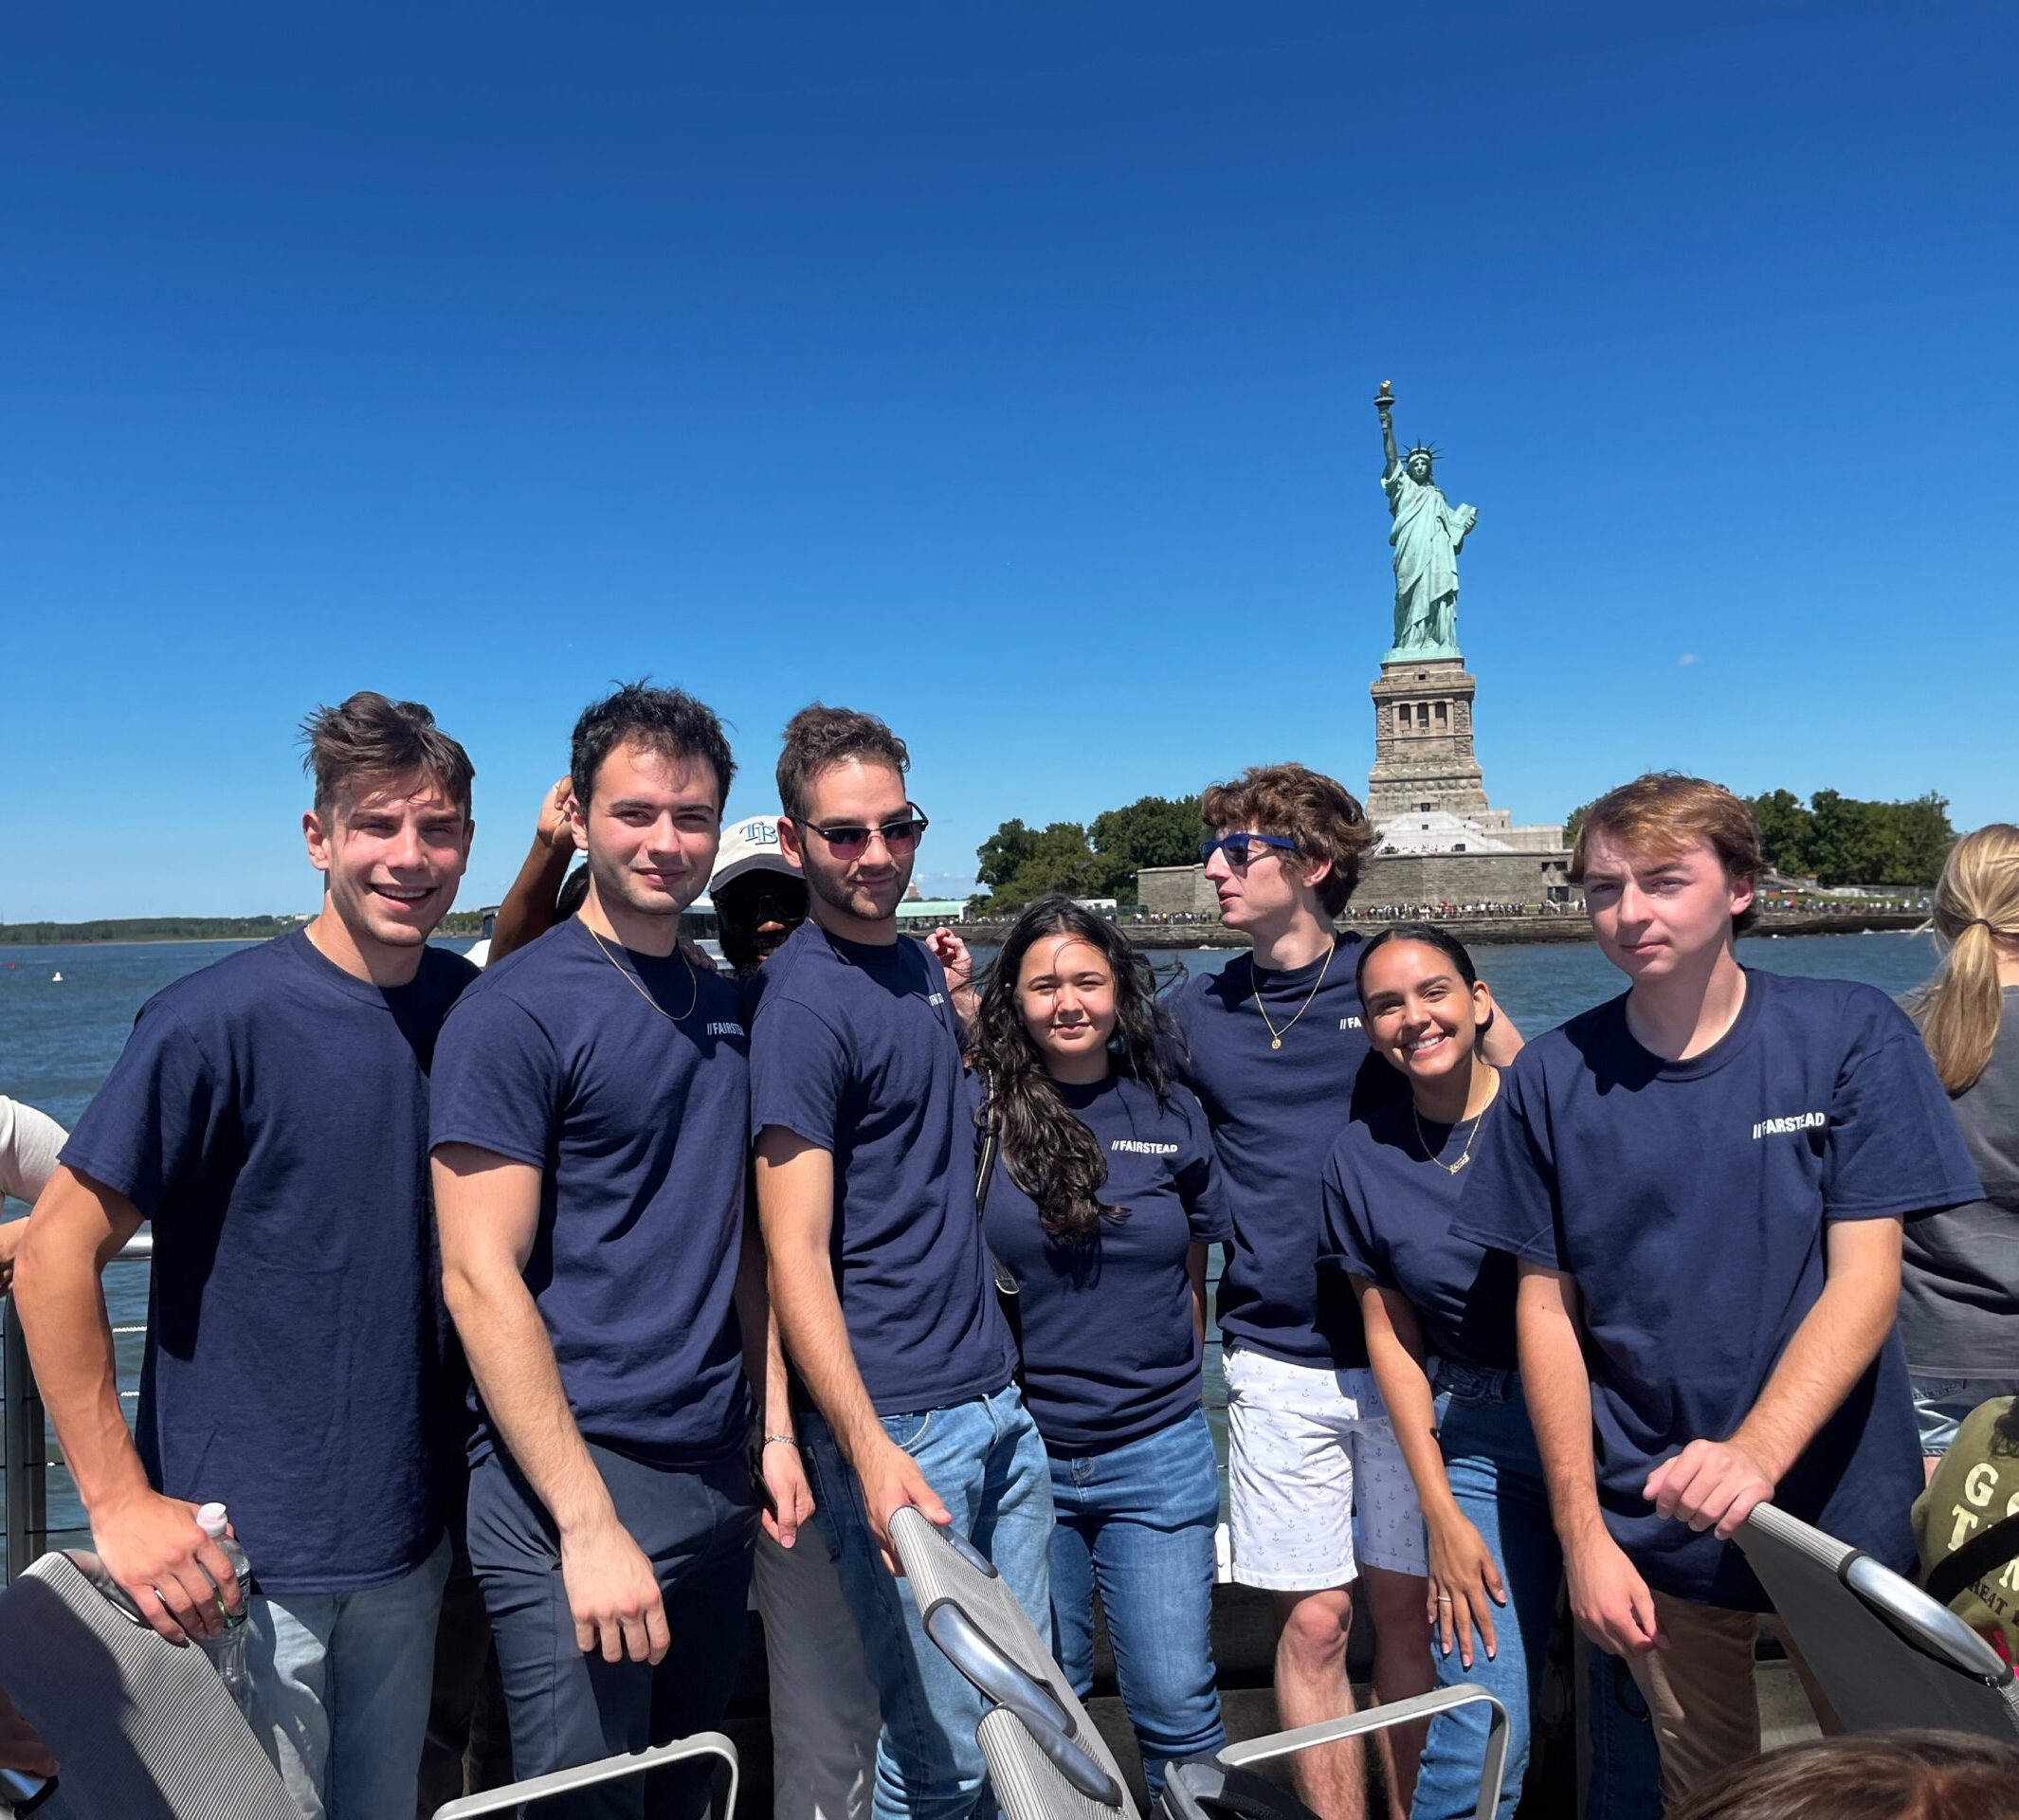 Group of interns on a boat tour in front of statue of liberty